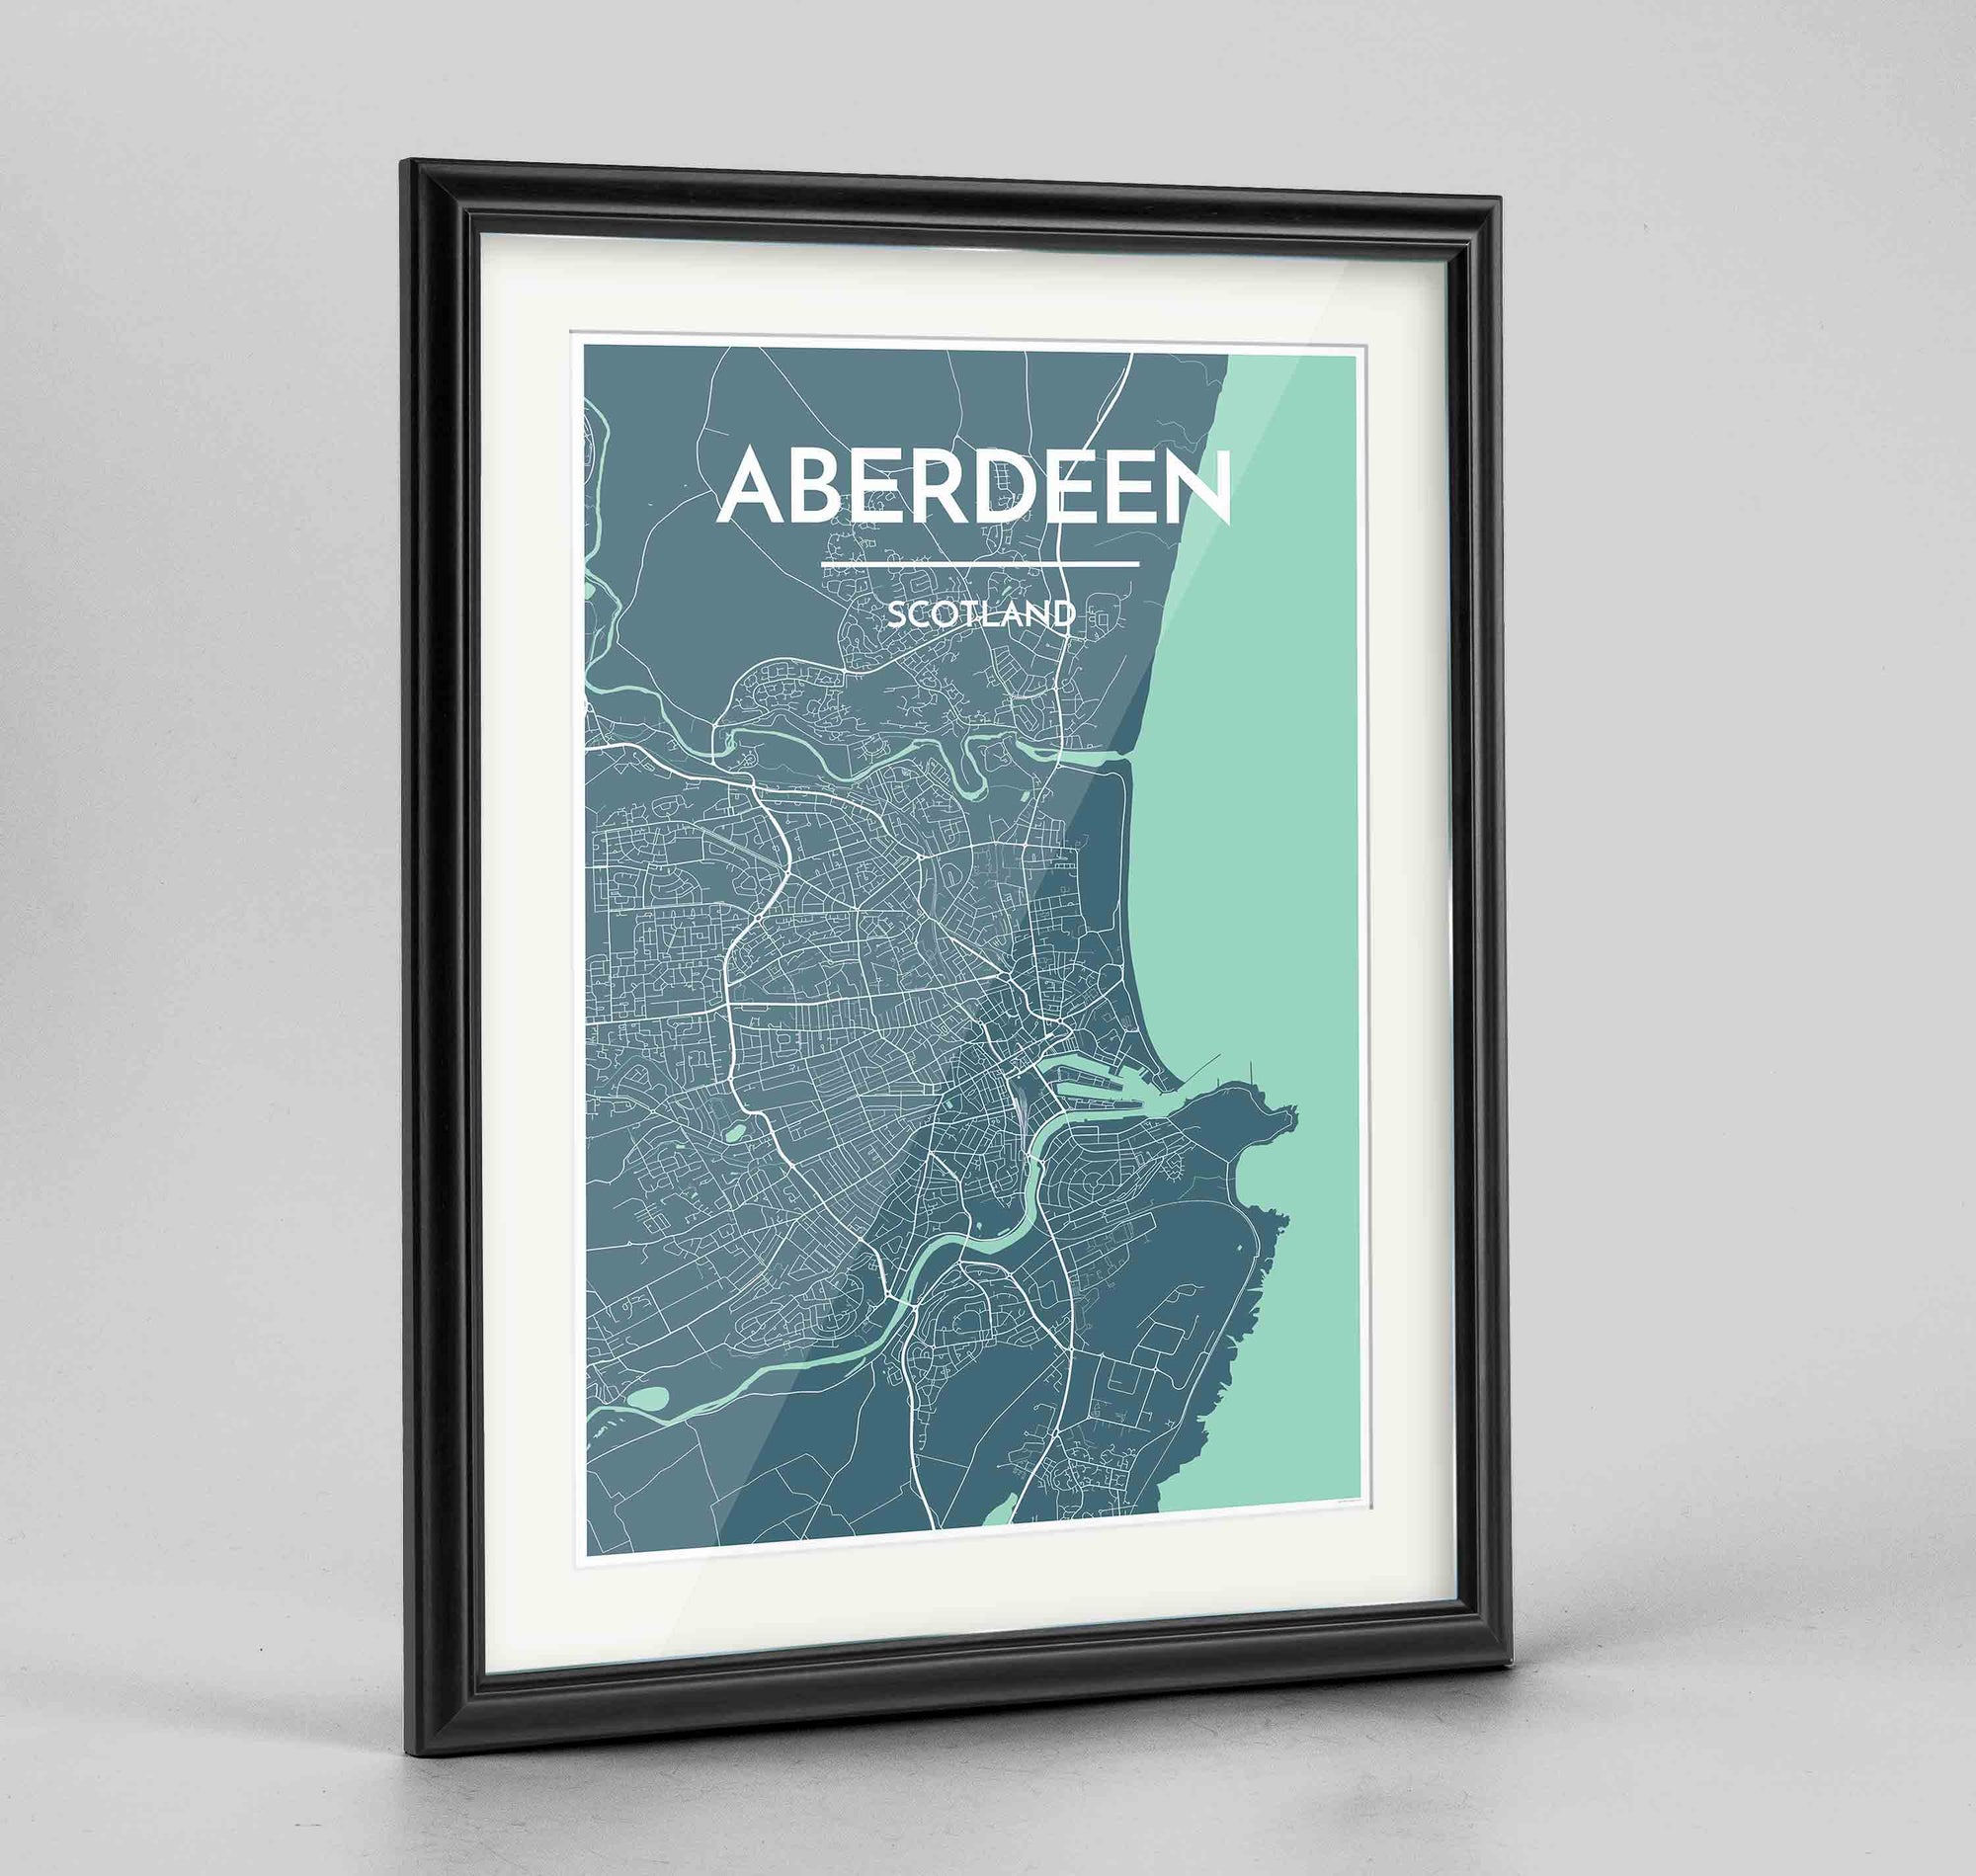 Framed Aberdeen Map Art Print 24x36" Traditional Black frame Point Two Design Group